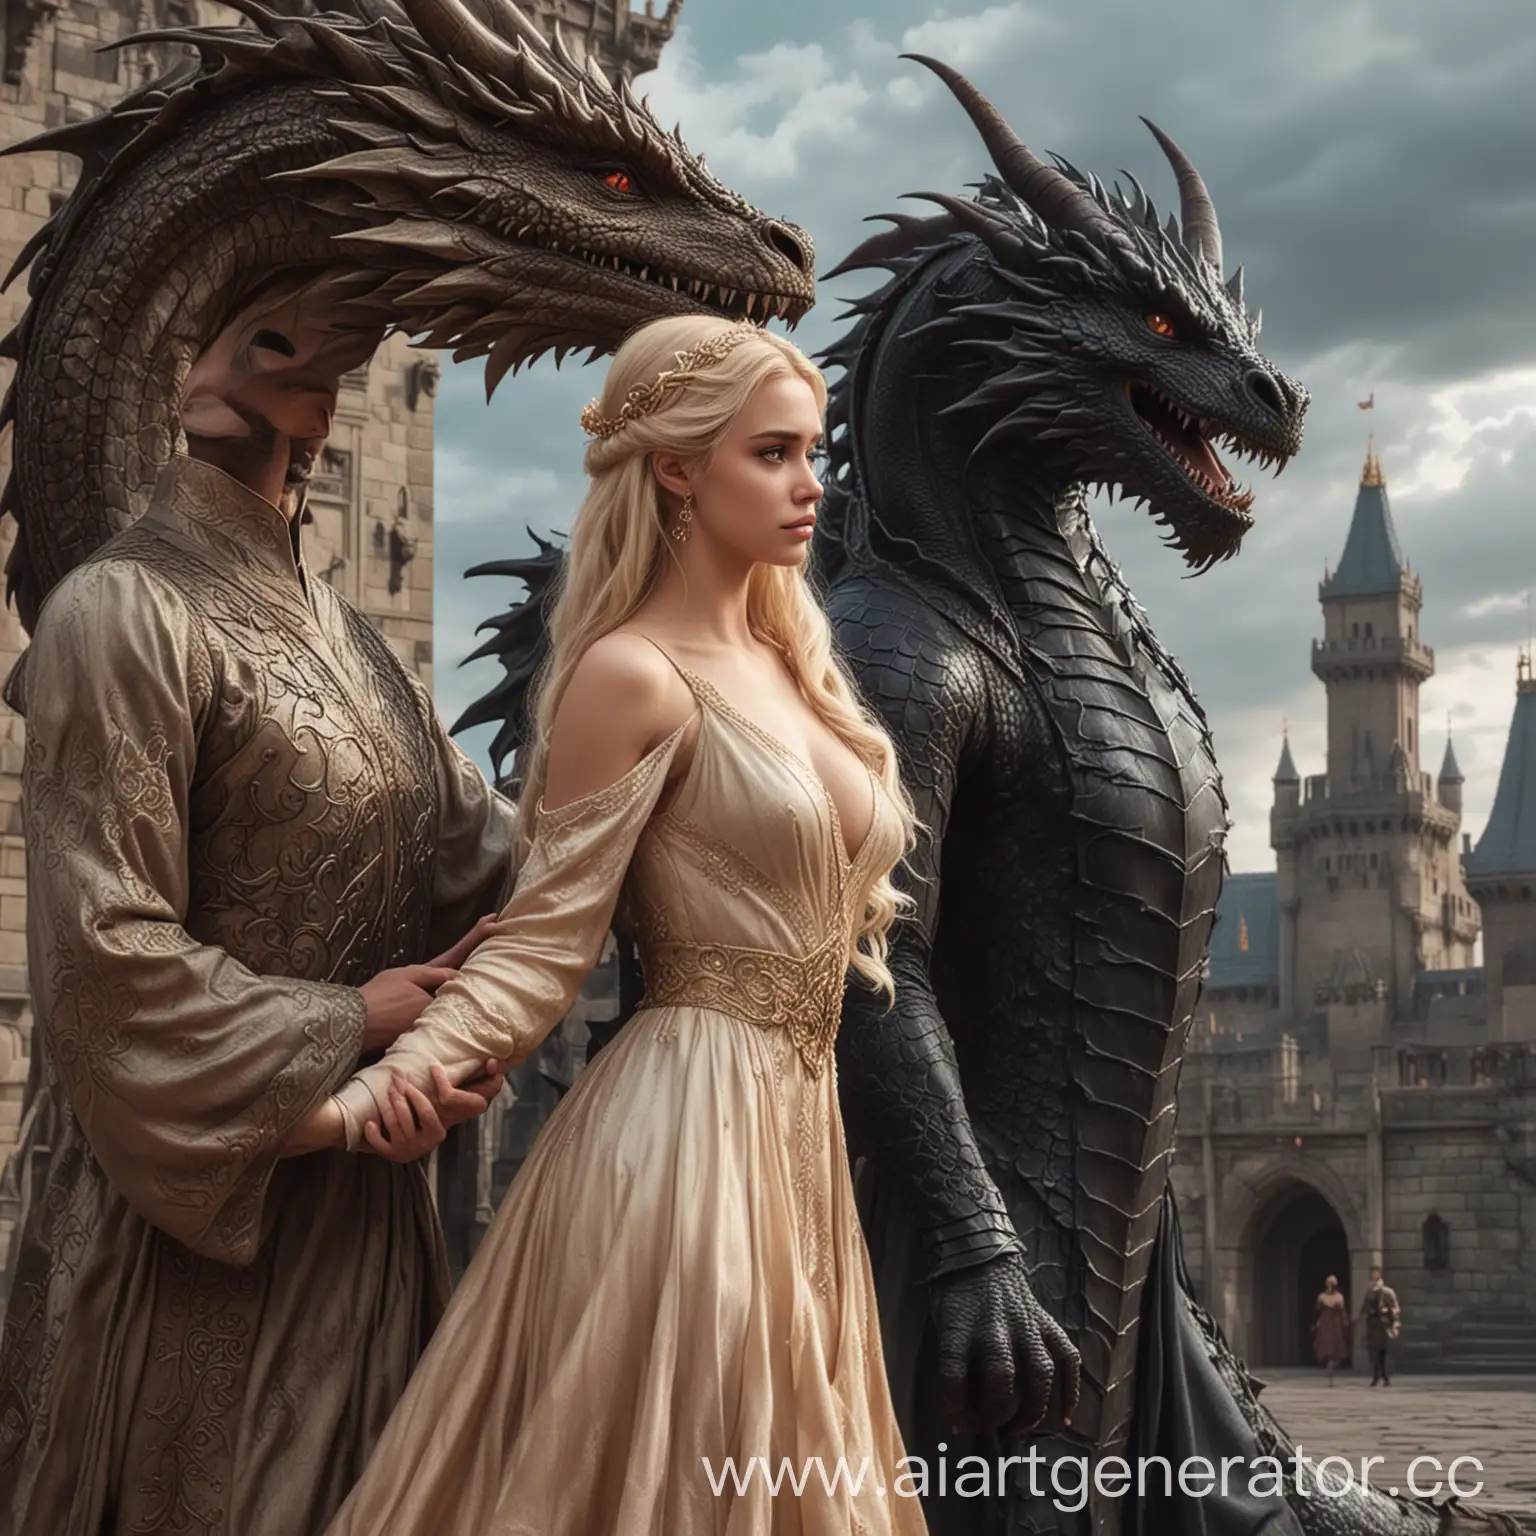 Blonde-Princess-Embraced-by-DarkHaired-Man-in-Dragon-Palace-Setting